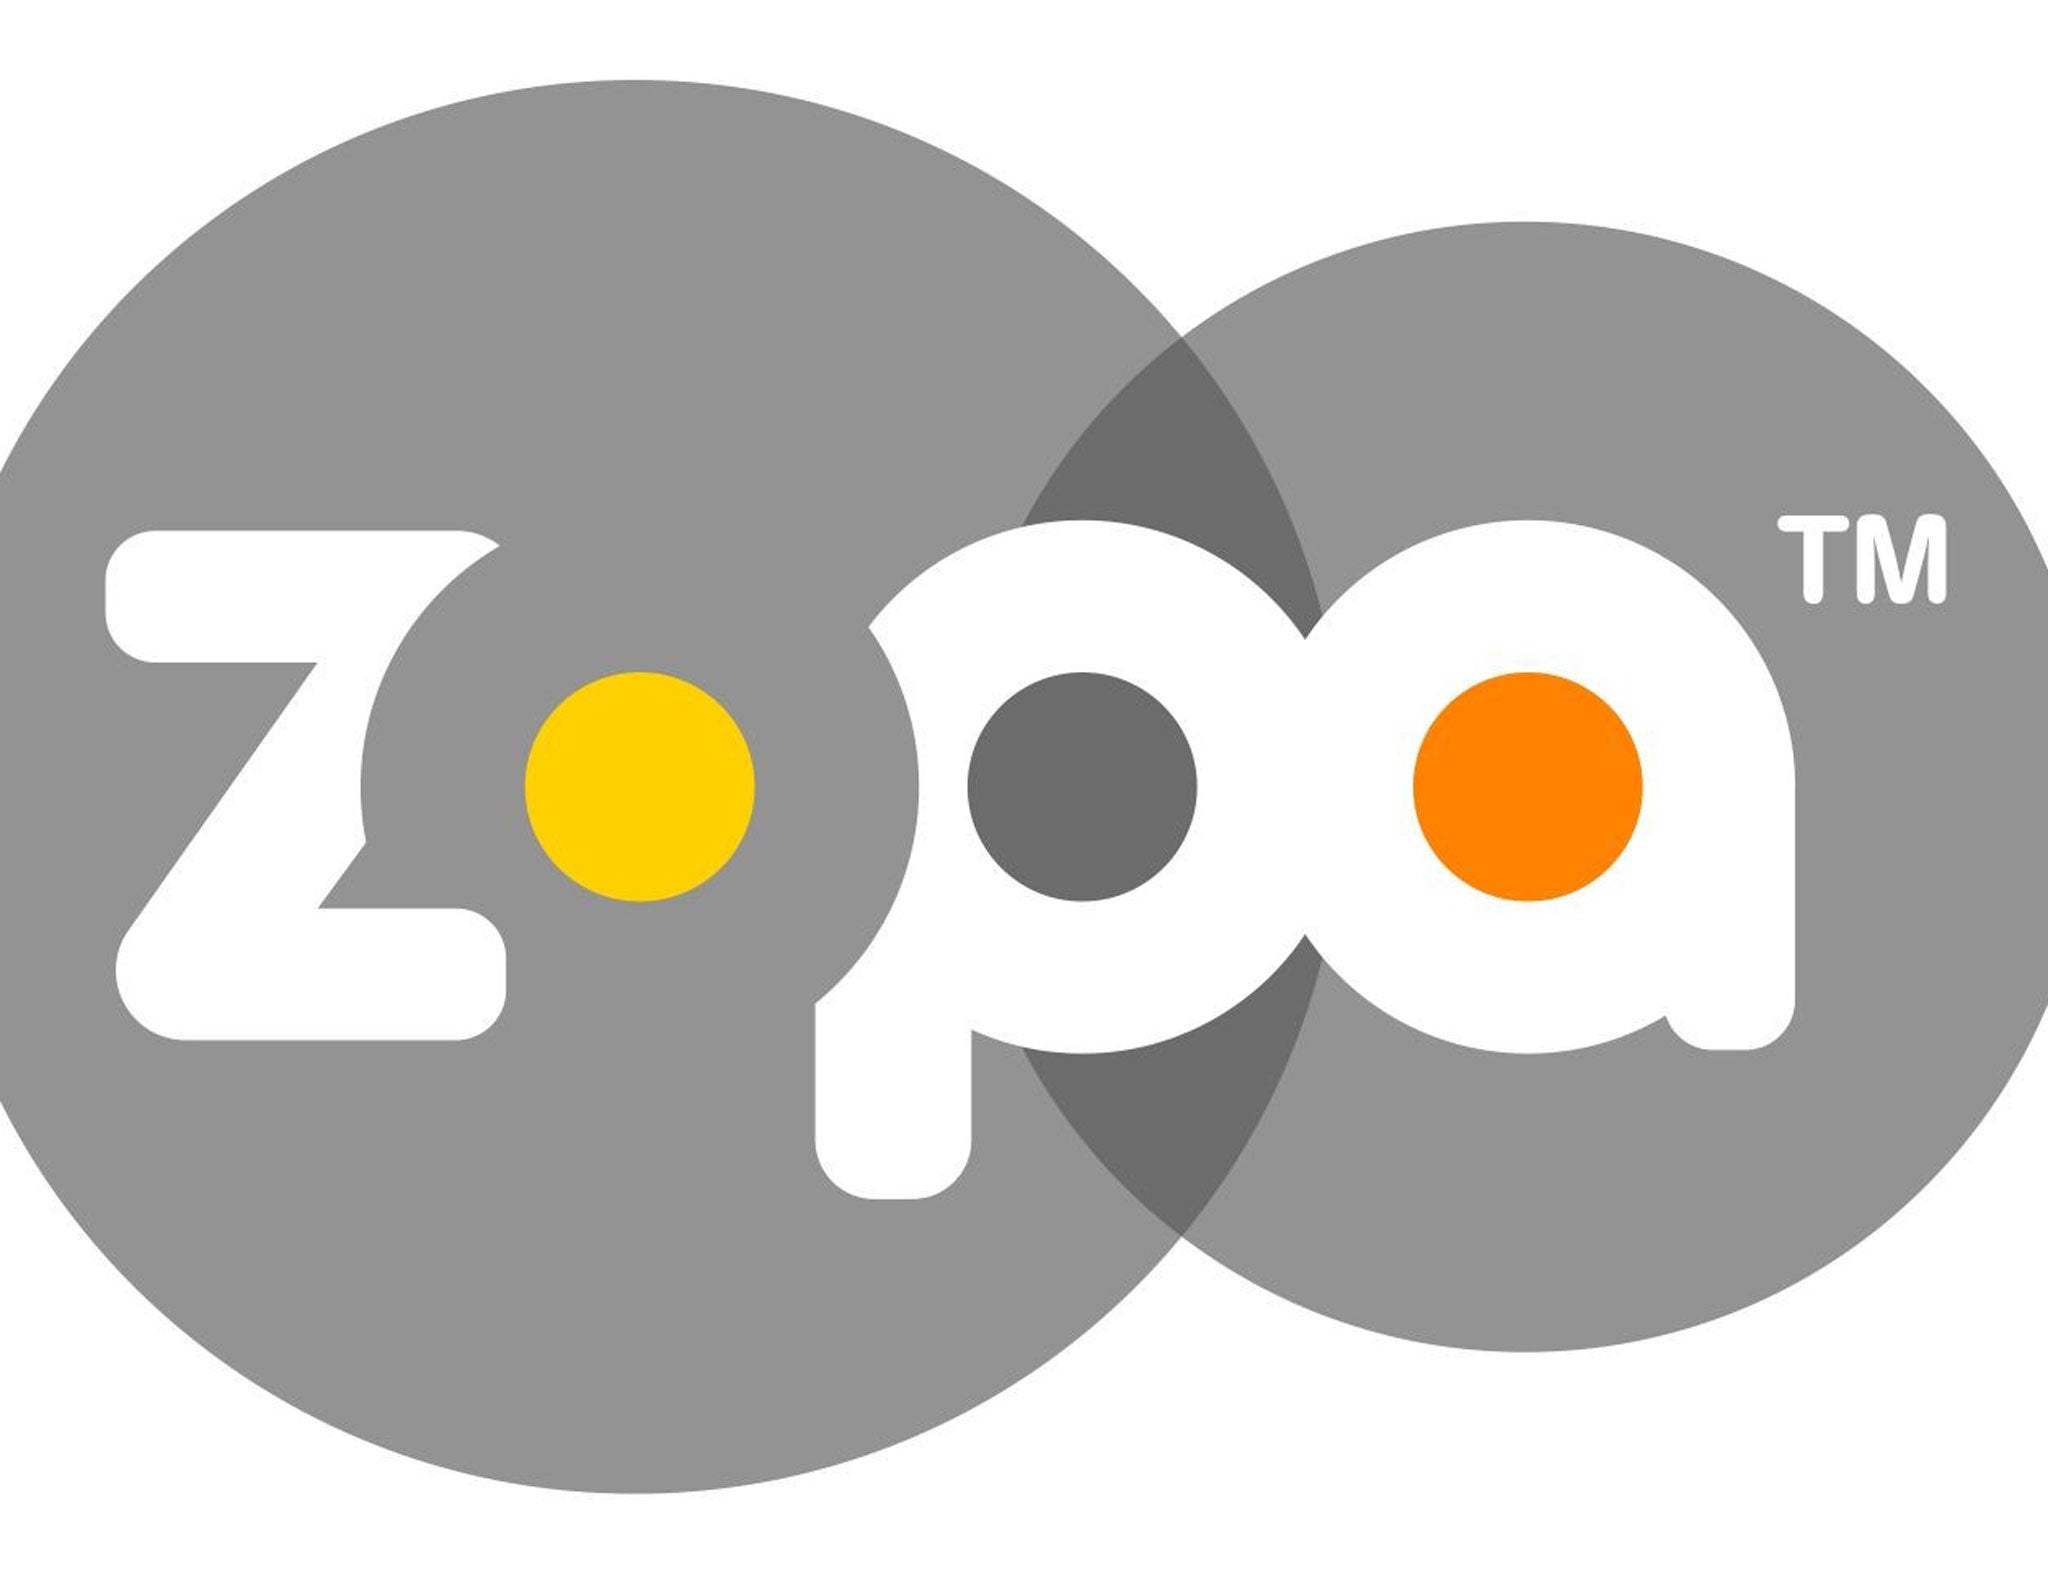 Zopa remains the biggest player in peer-to-peer lending